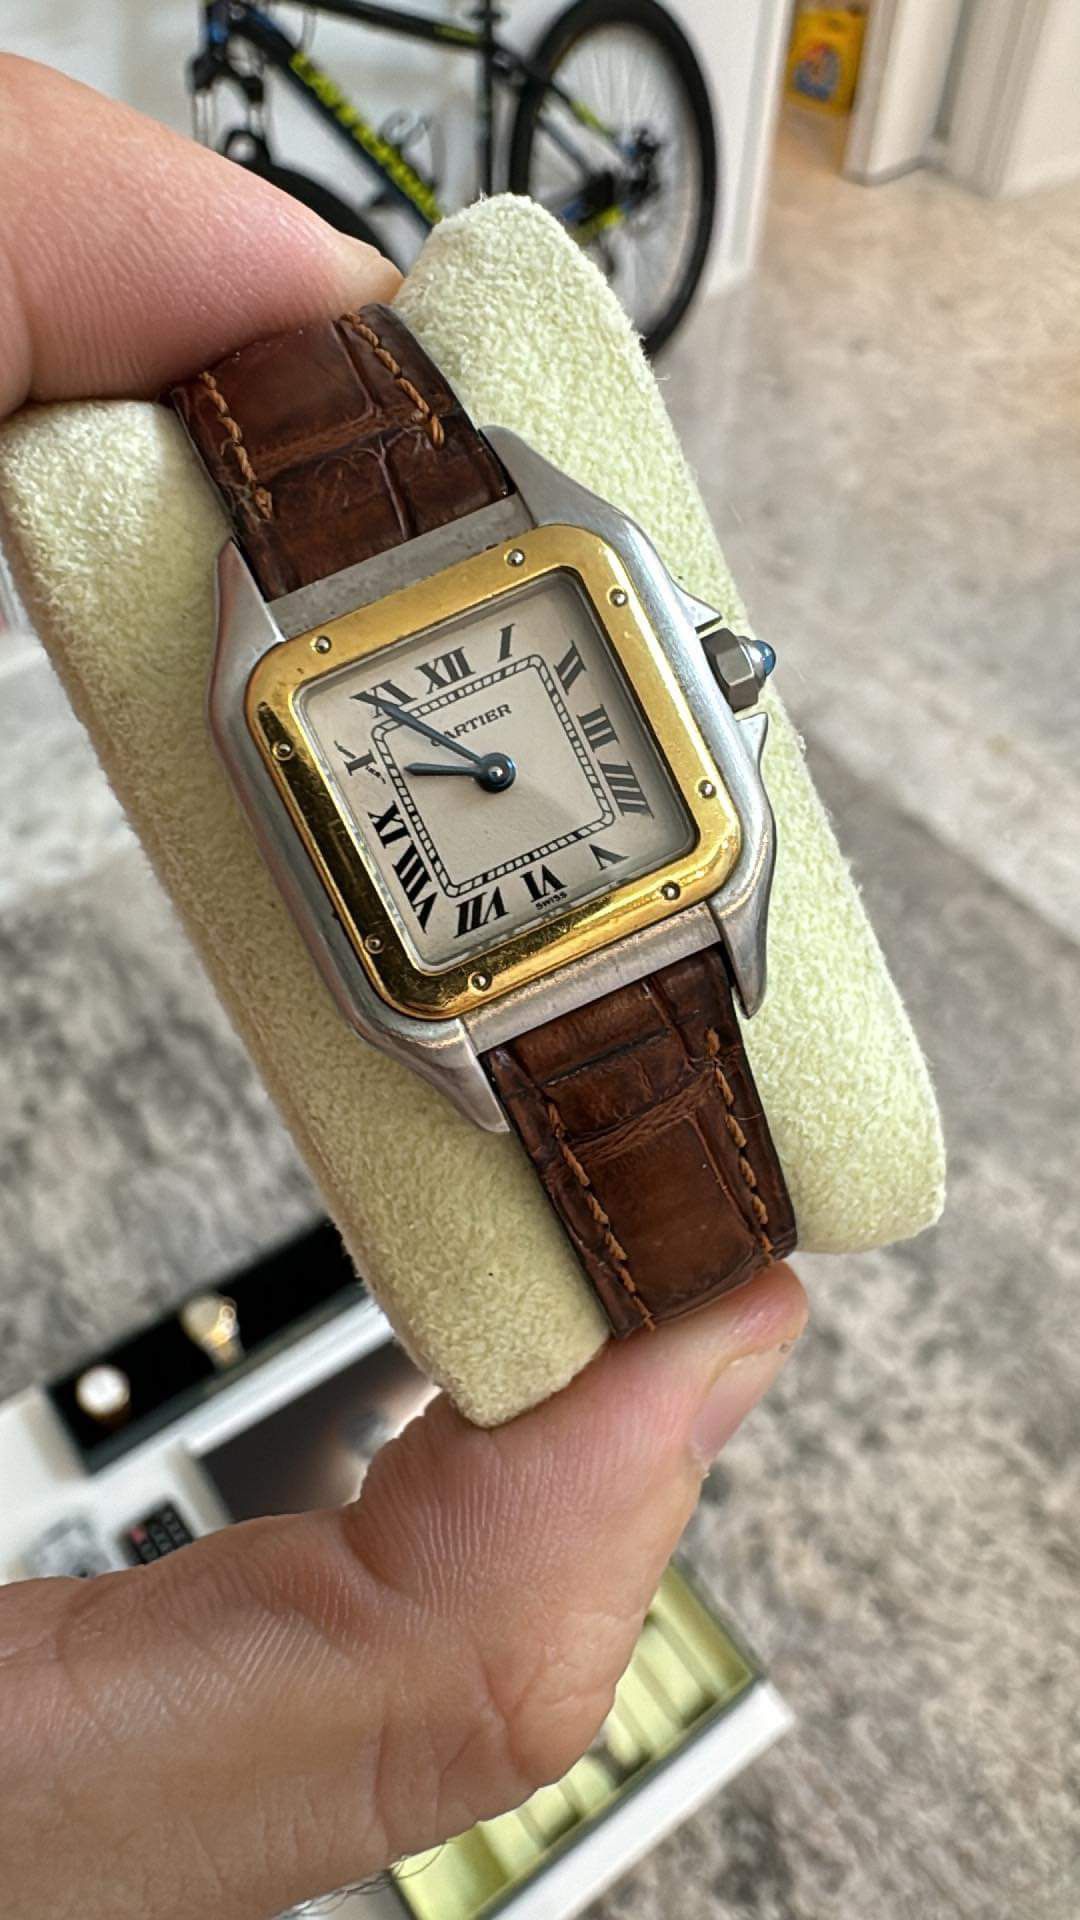 Cartier Panthere Ref. 1120 Two Tone - Unisex